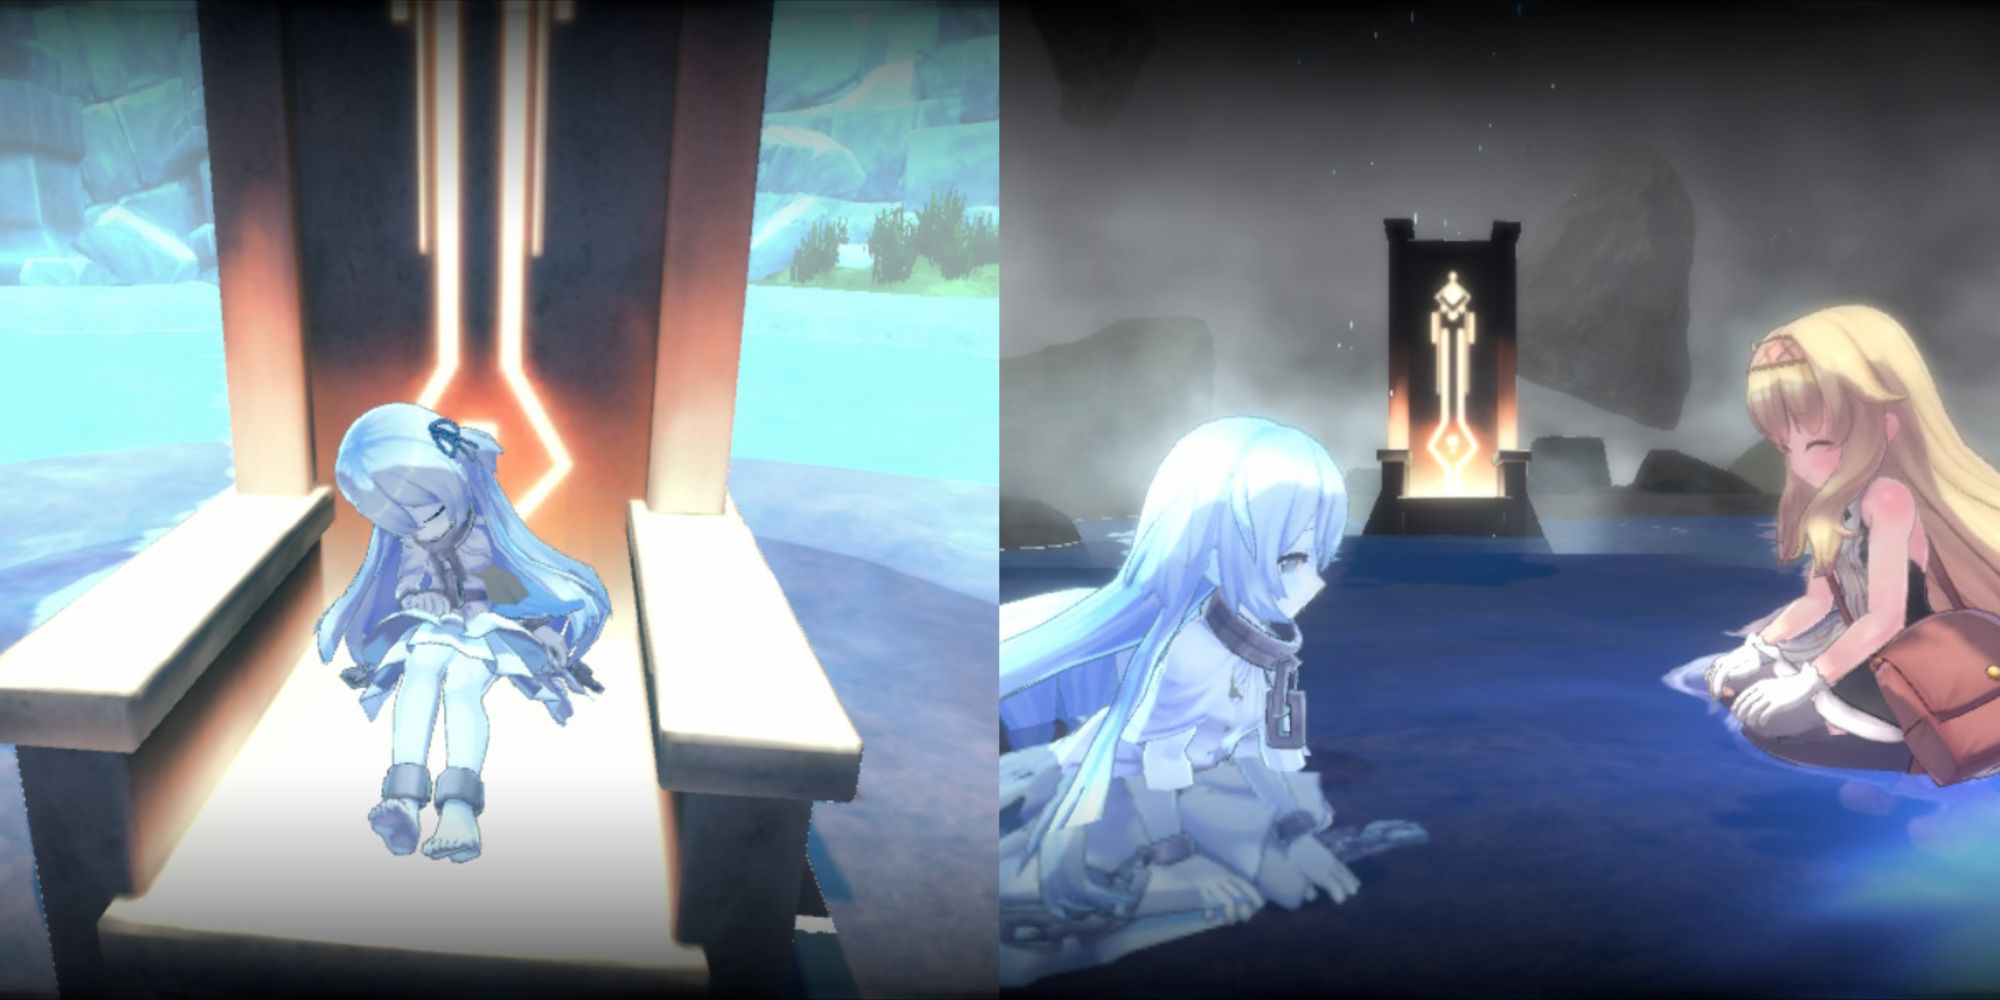 A collage of Nonota on the throne and talking with Nobeta in Little Witch Nobeta.